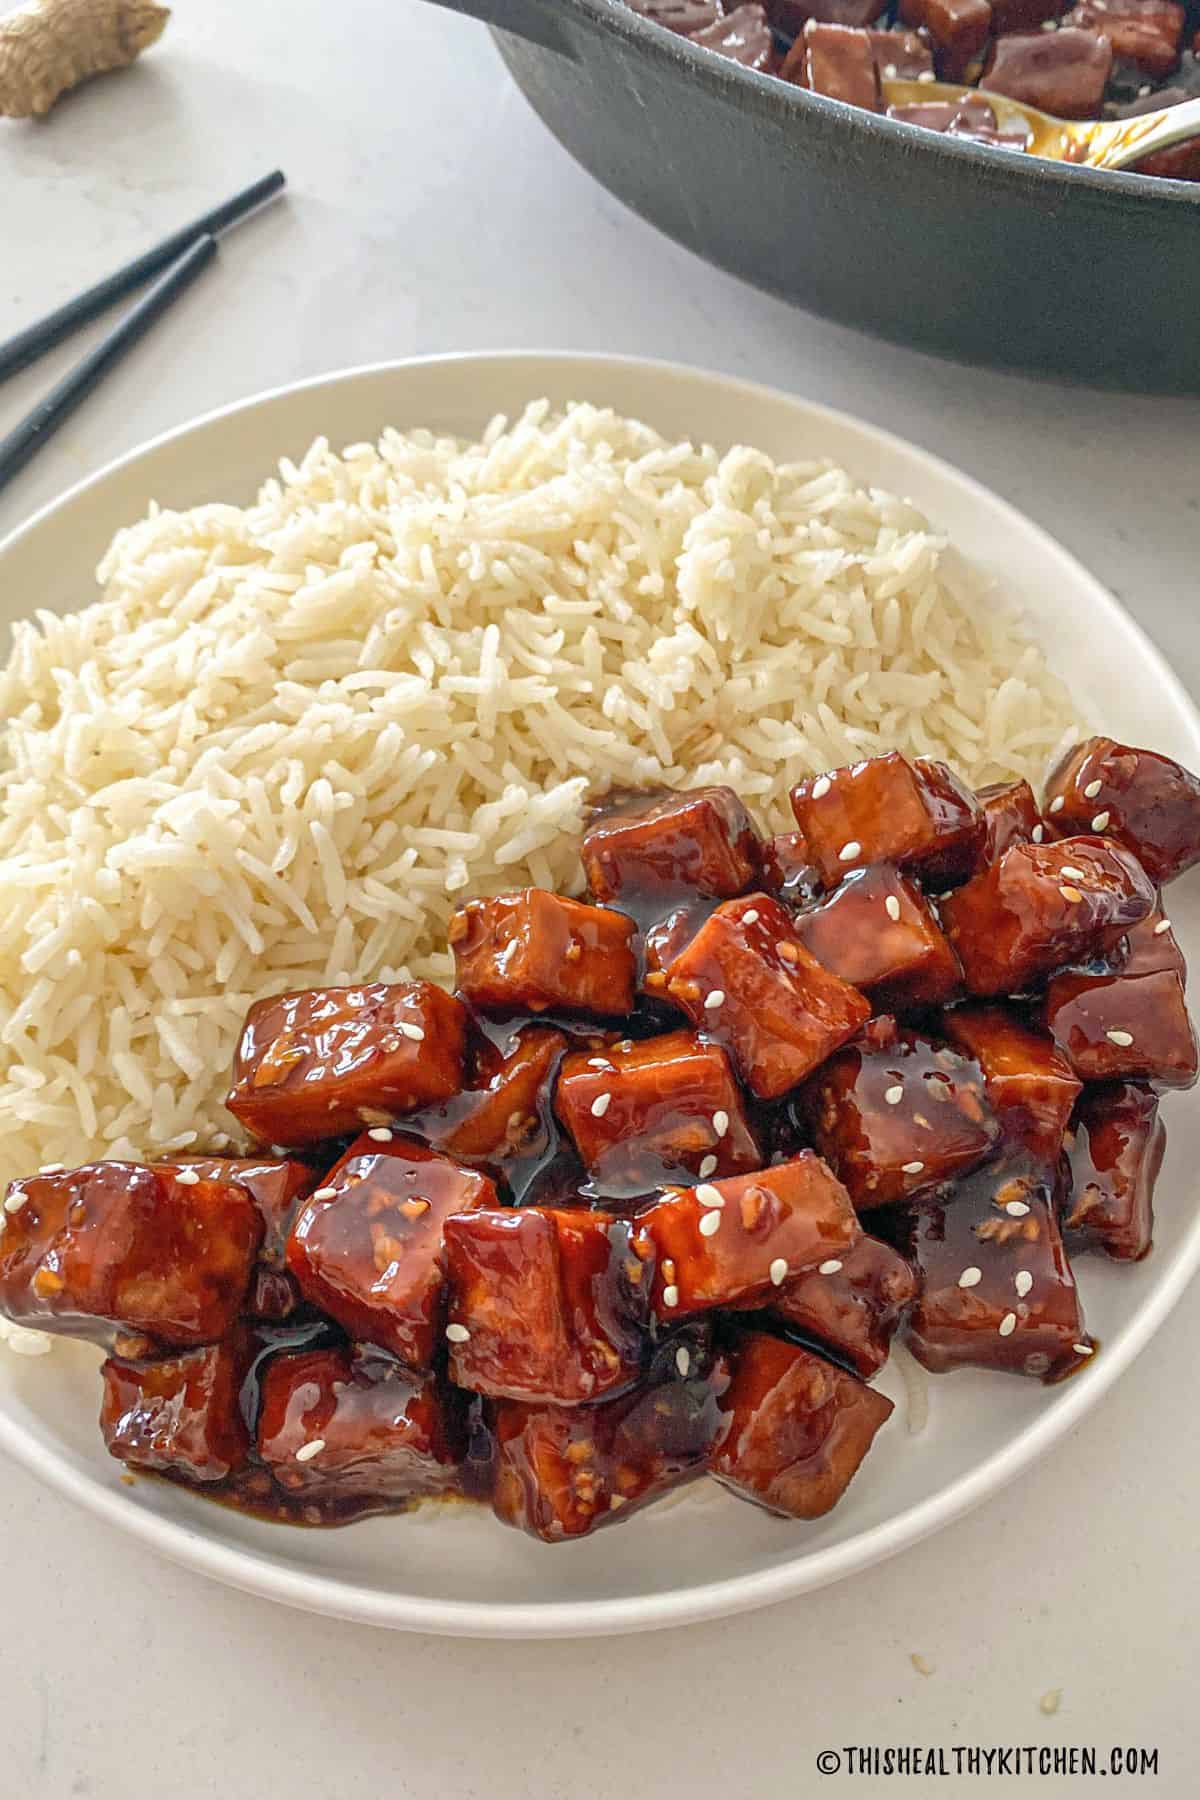 Plate with rice on one half and mongolian tofu on the other half.